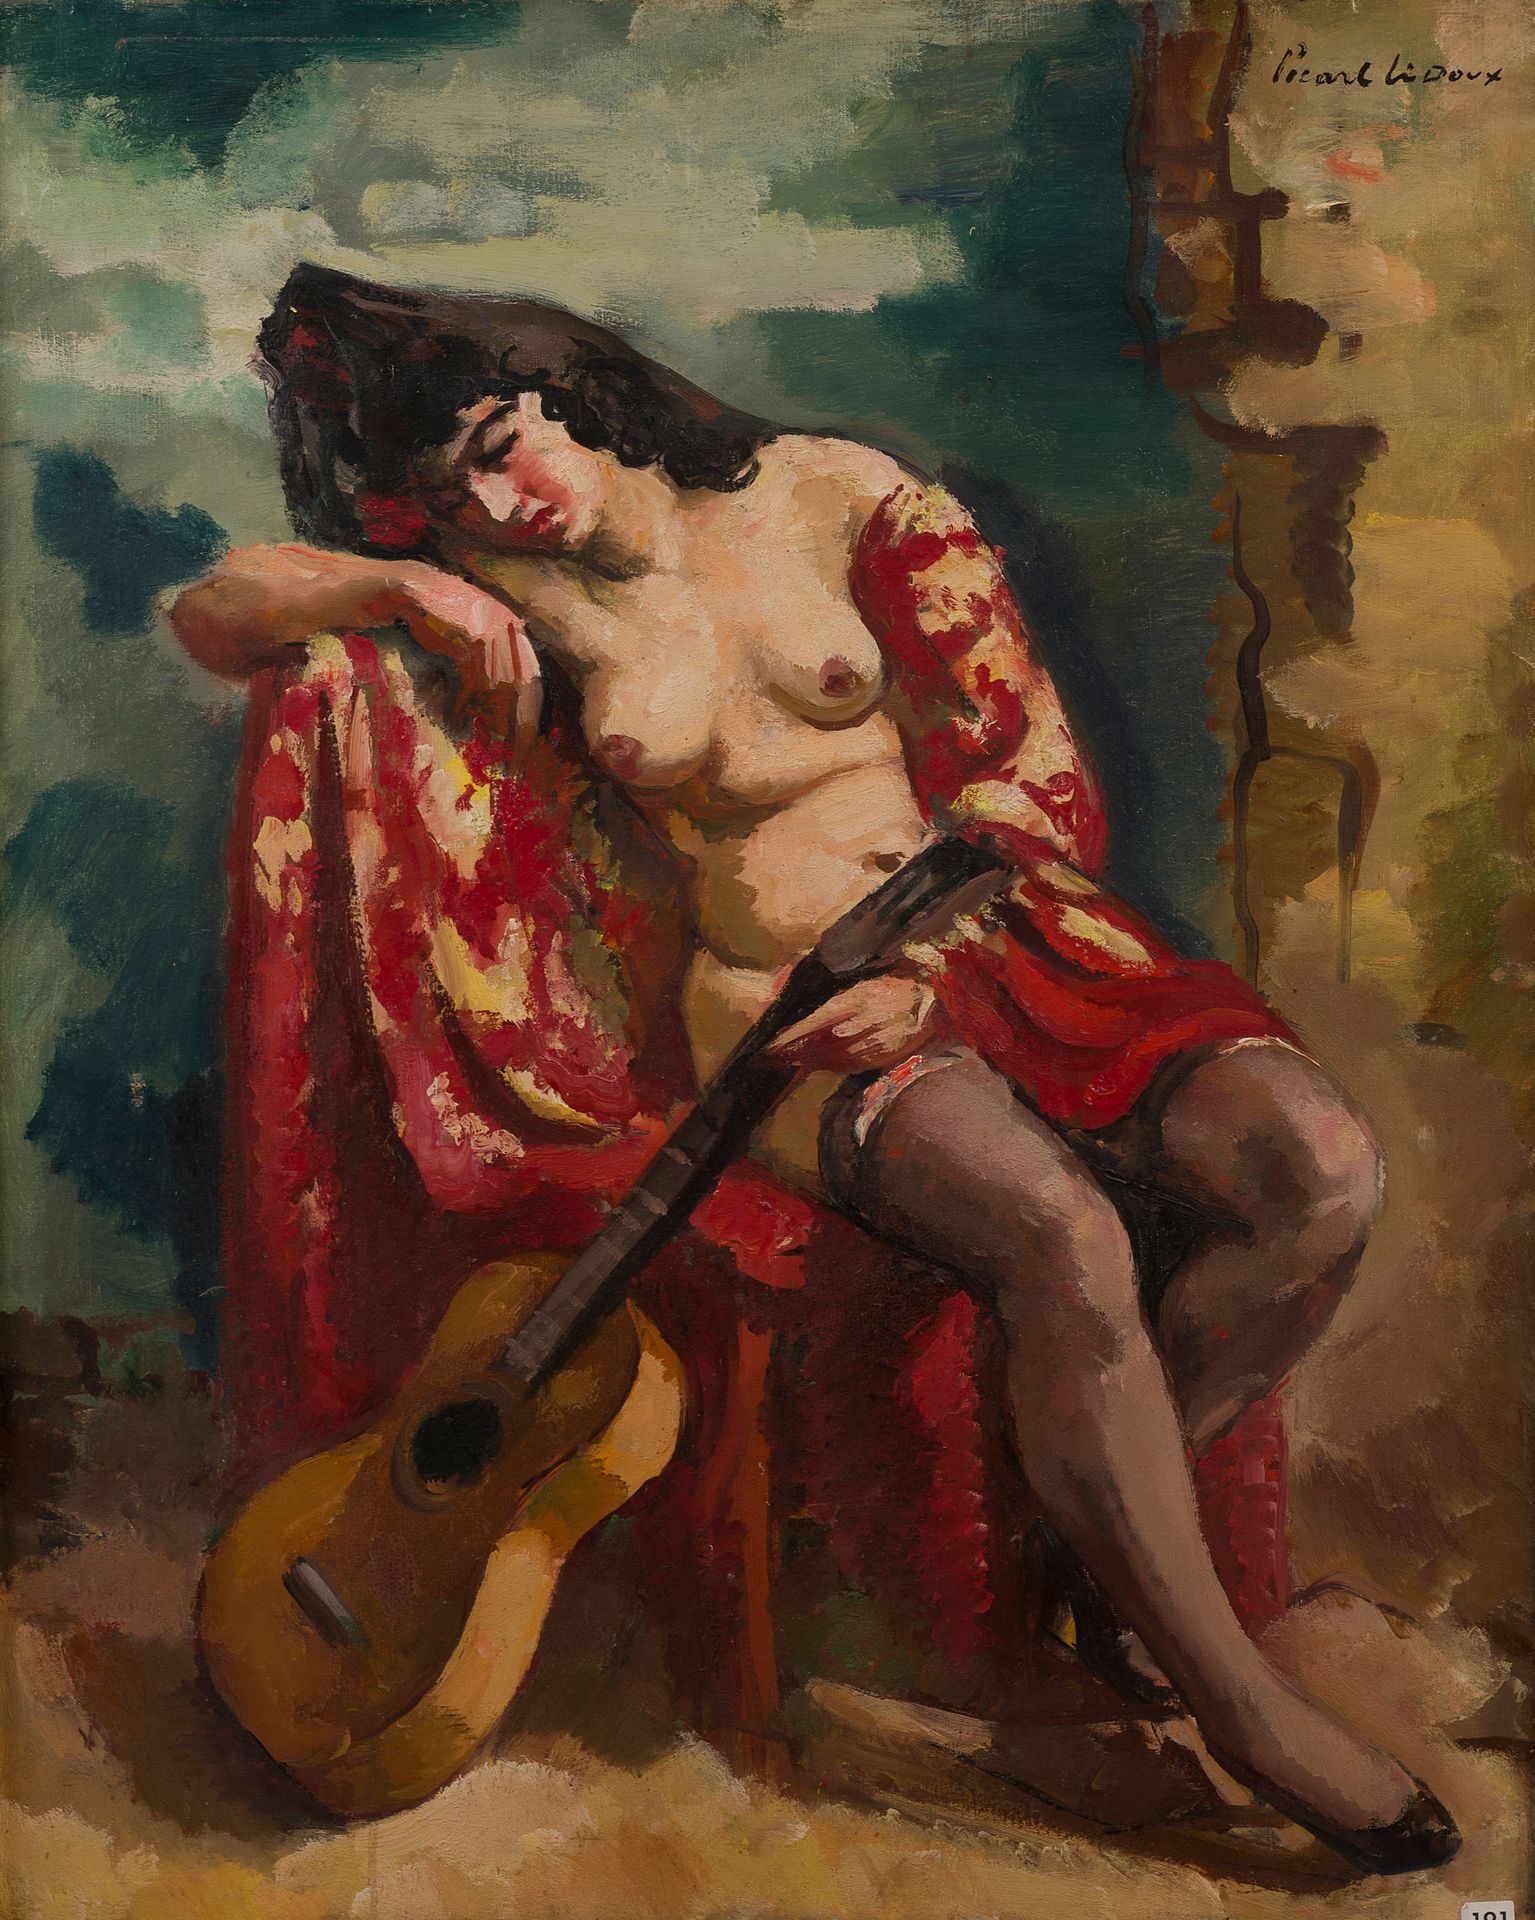 Null Charles PICART LE DOUX (1881-1959)
The nude with the guitar, 1938
Oil on ca&hellip;